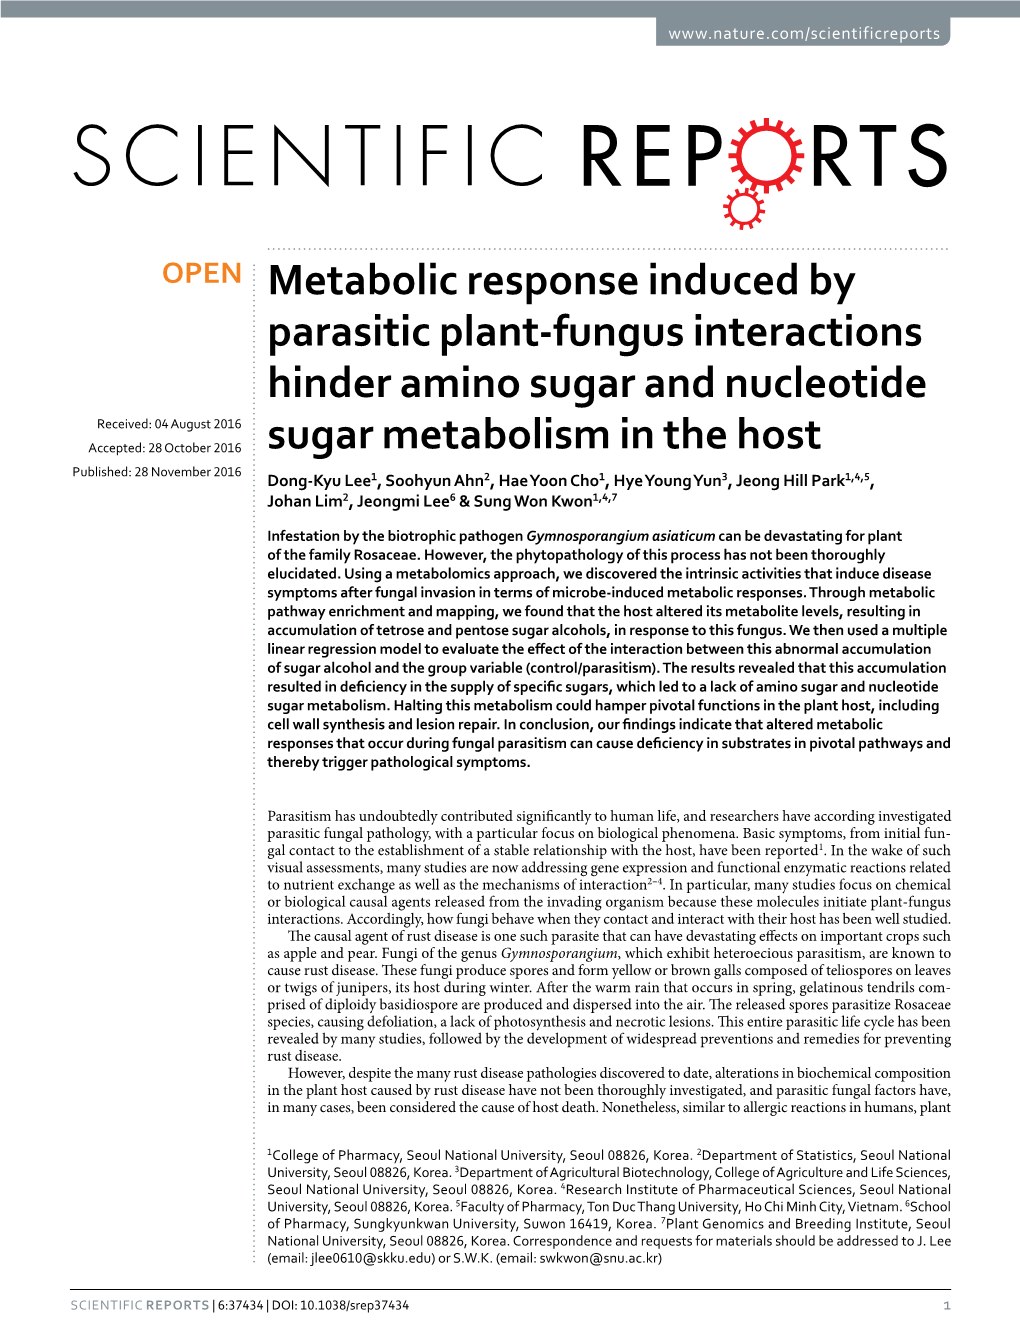 Metabolic Response Induced by Parasitic Plant-Fungus Interactions